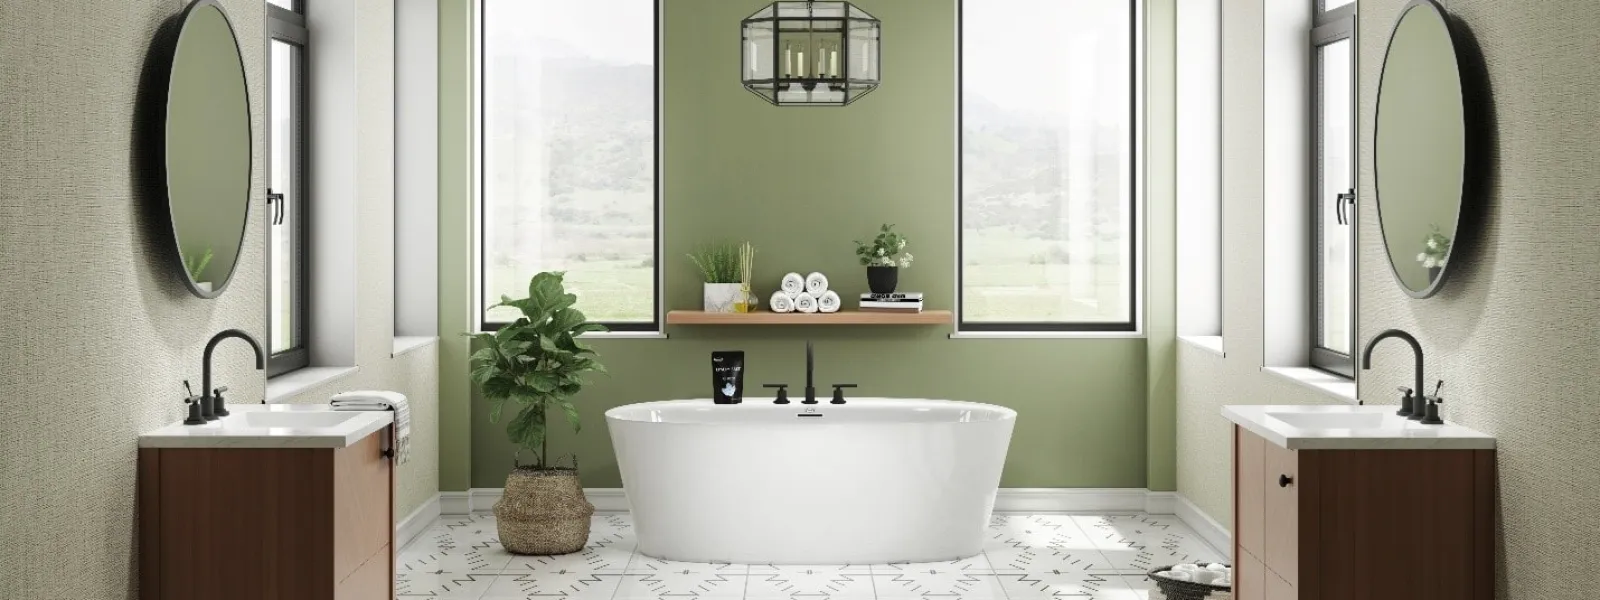 Top 5 Benefits of a Freestanding Tub